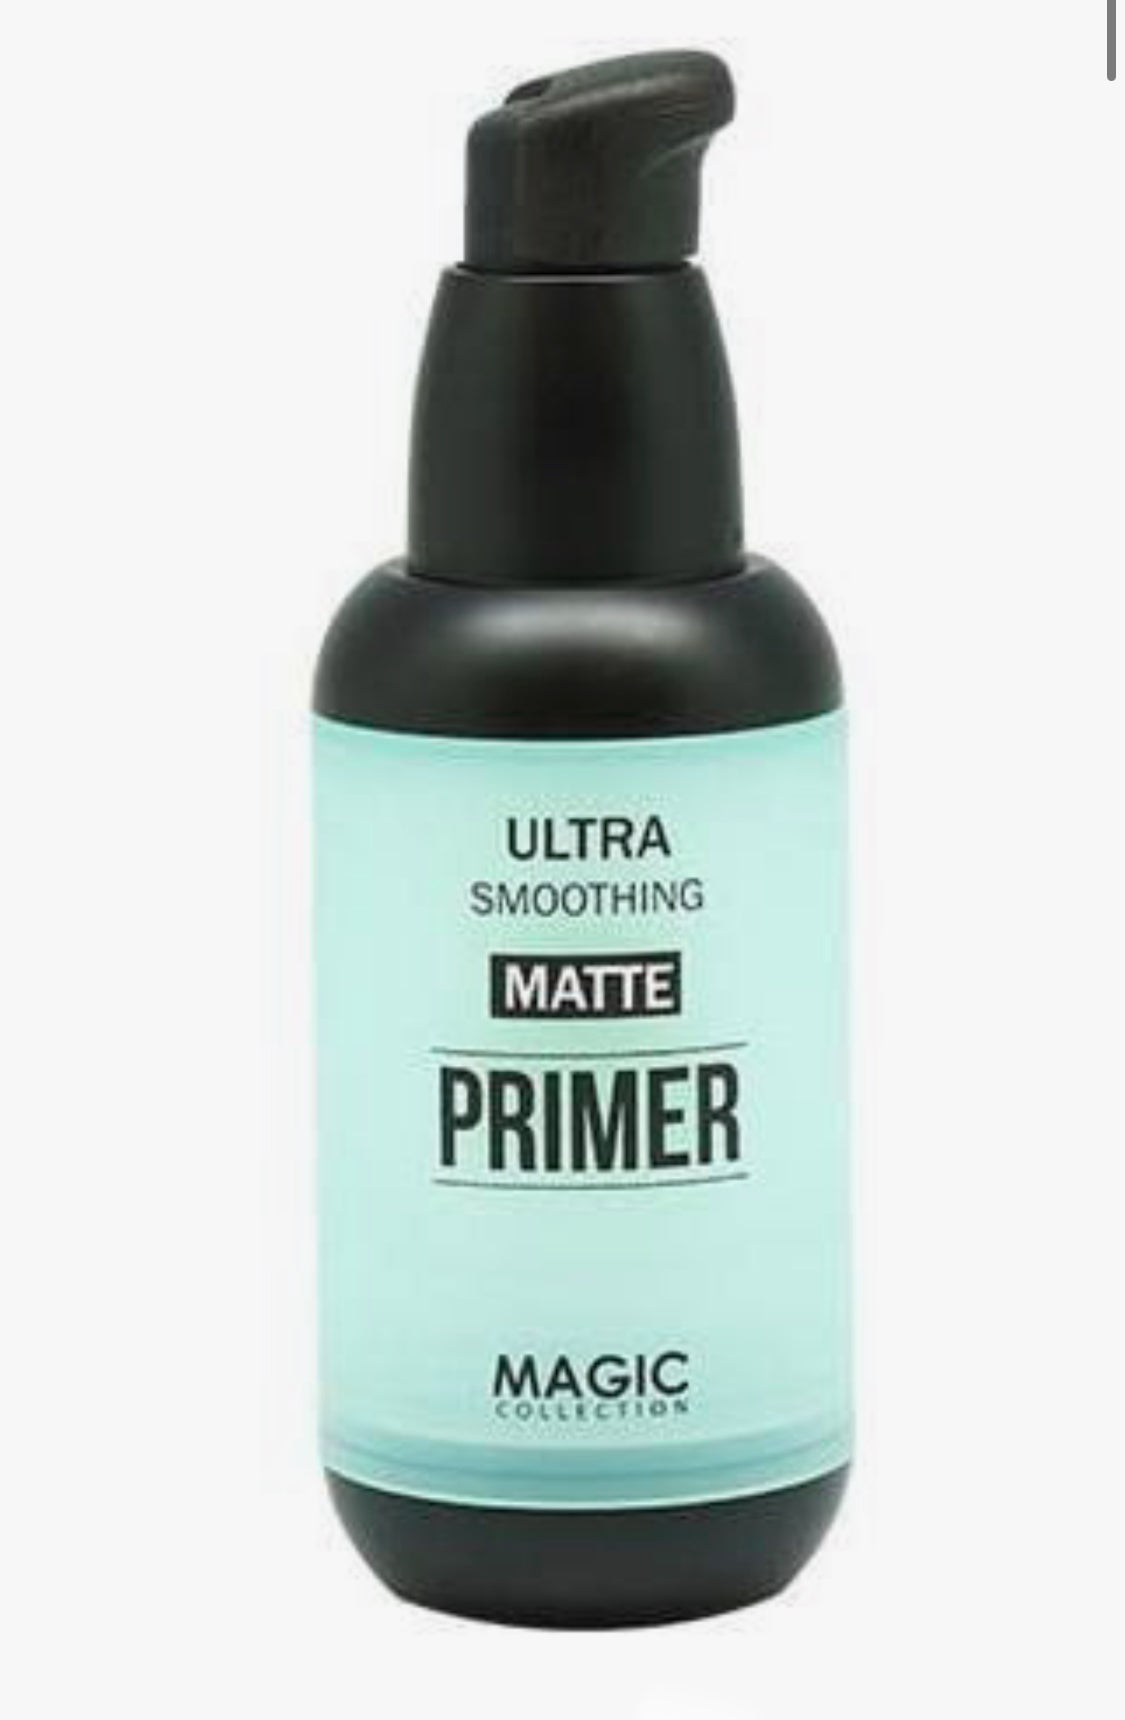 Magic Collection Primer Matte - Tam's Beauty Supply 